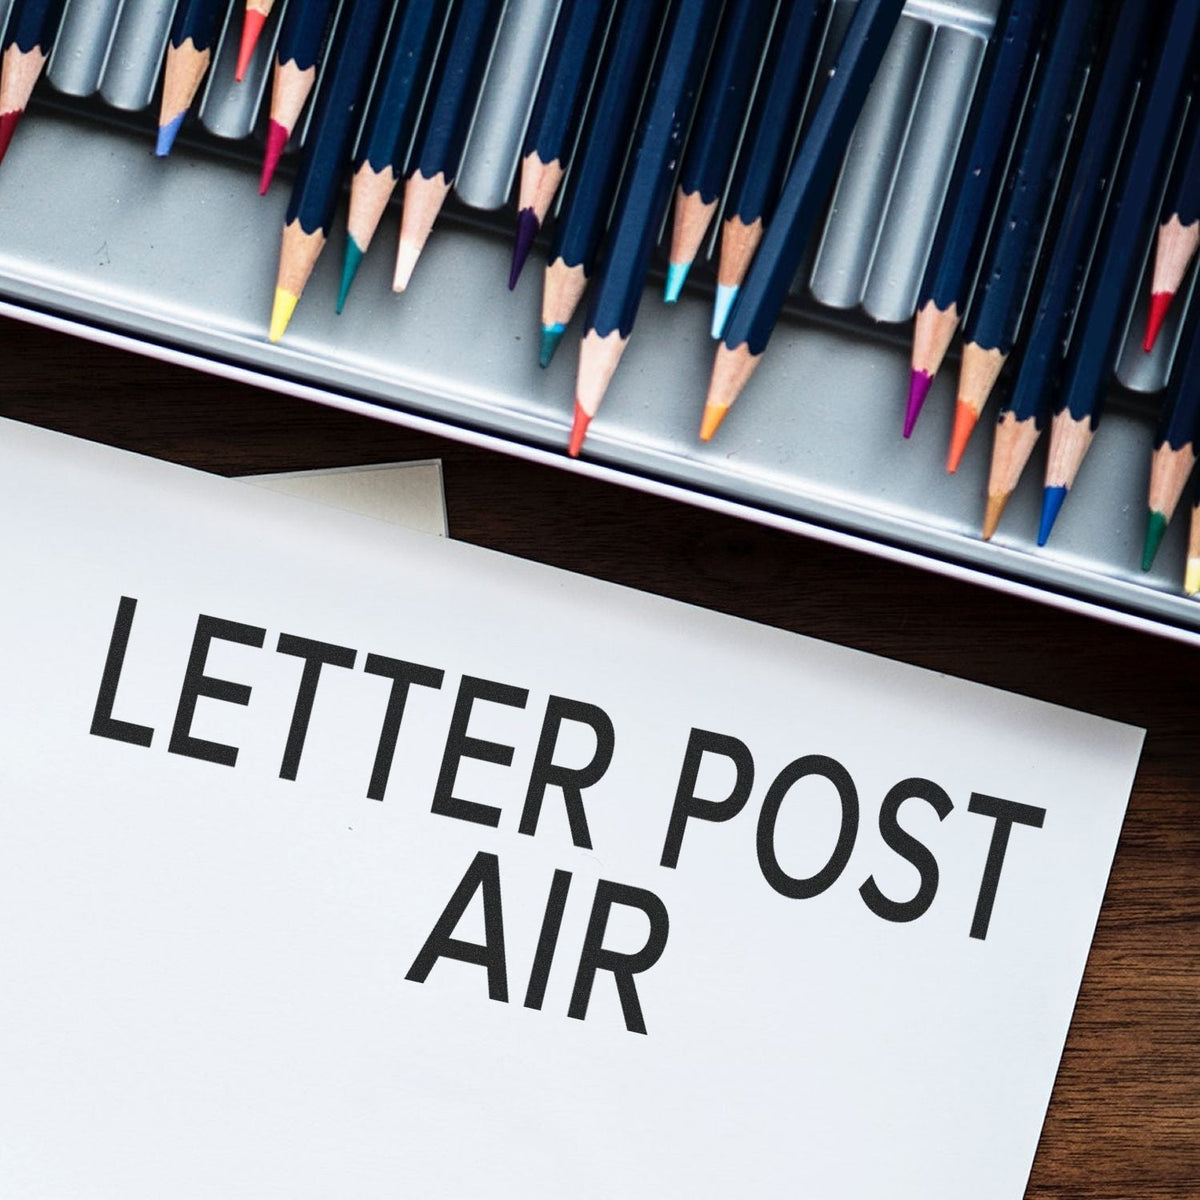 Self-Inking Letter Post Air Stamp Lifestyle Photo